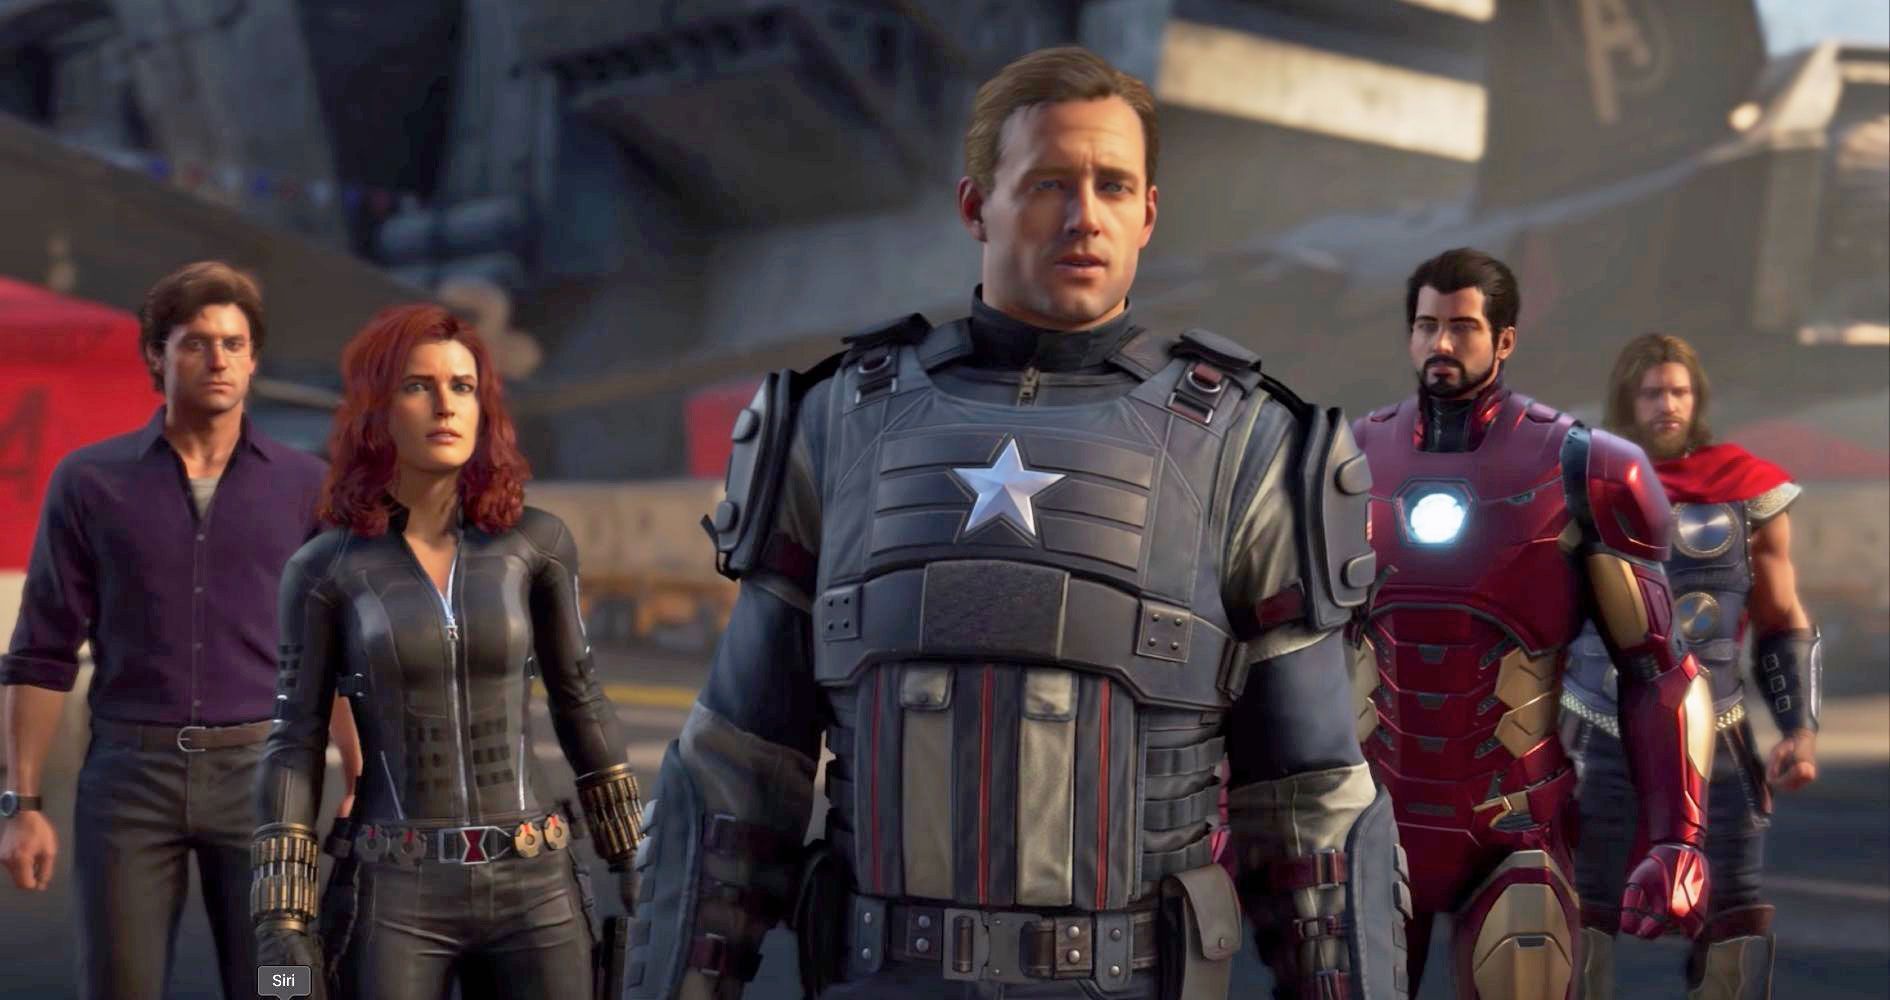 I'm worried about this 'Marvel's Avengers' game